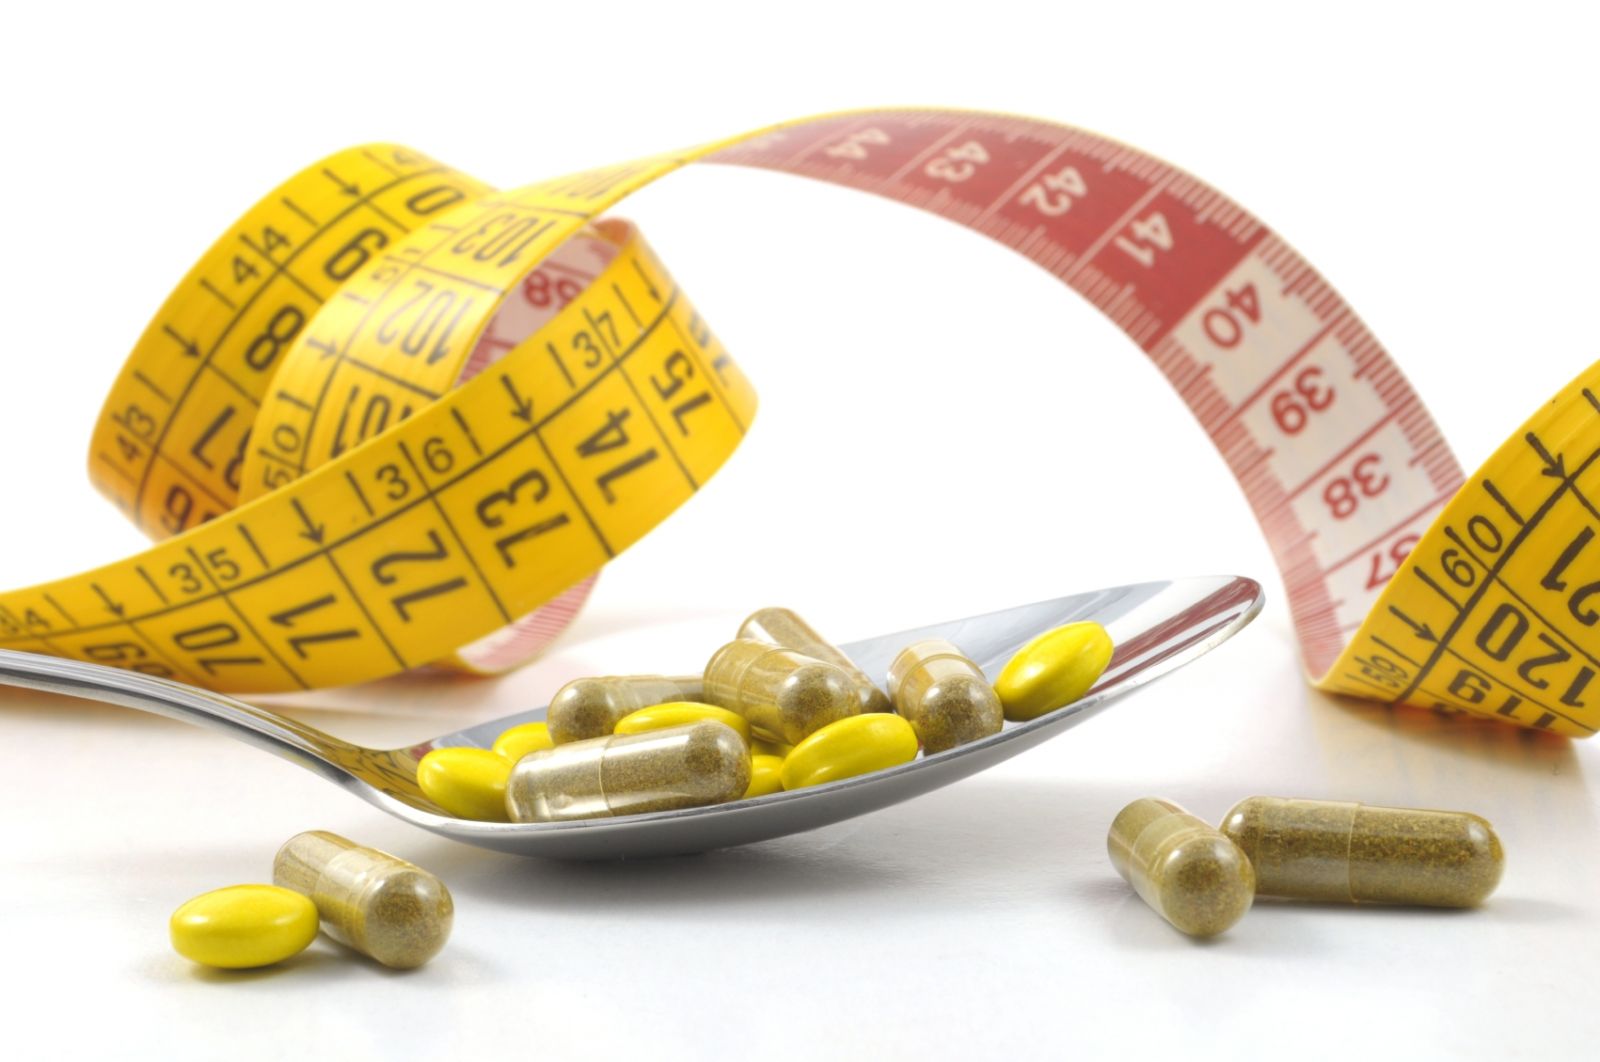 Are weight-loss drugs worth trying? - Harvard Health